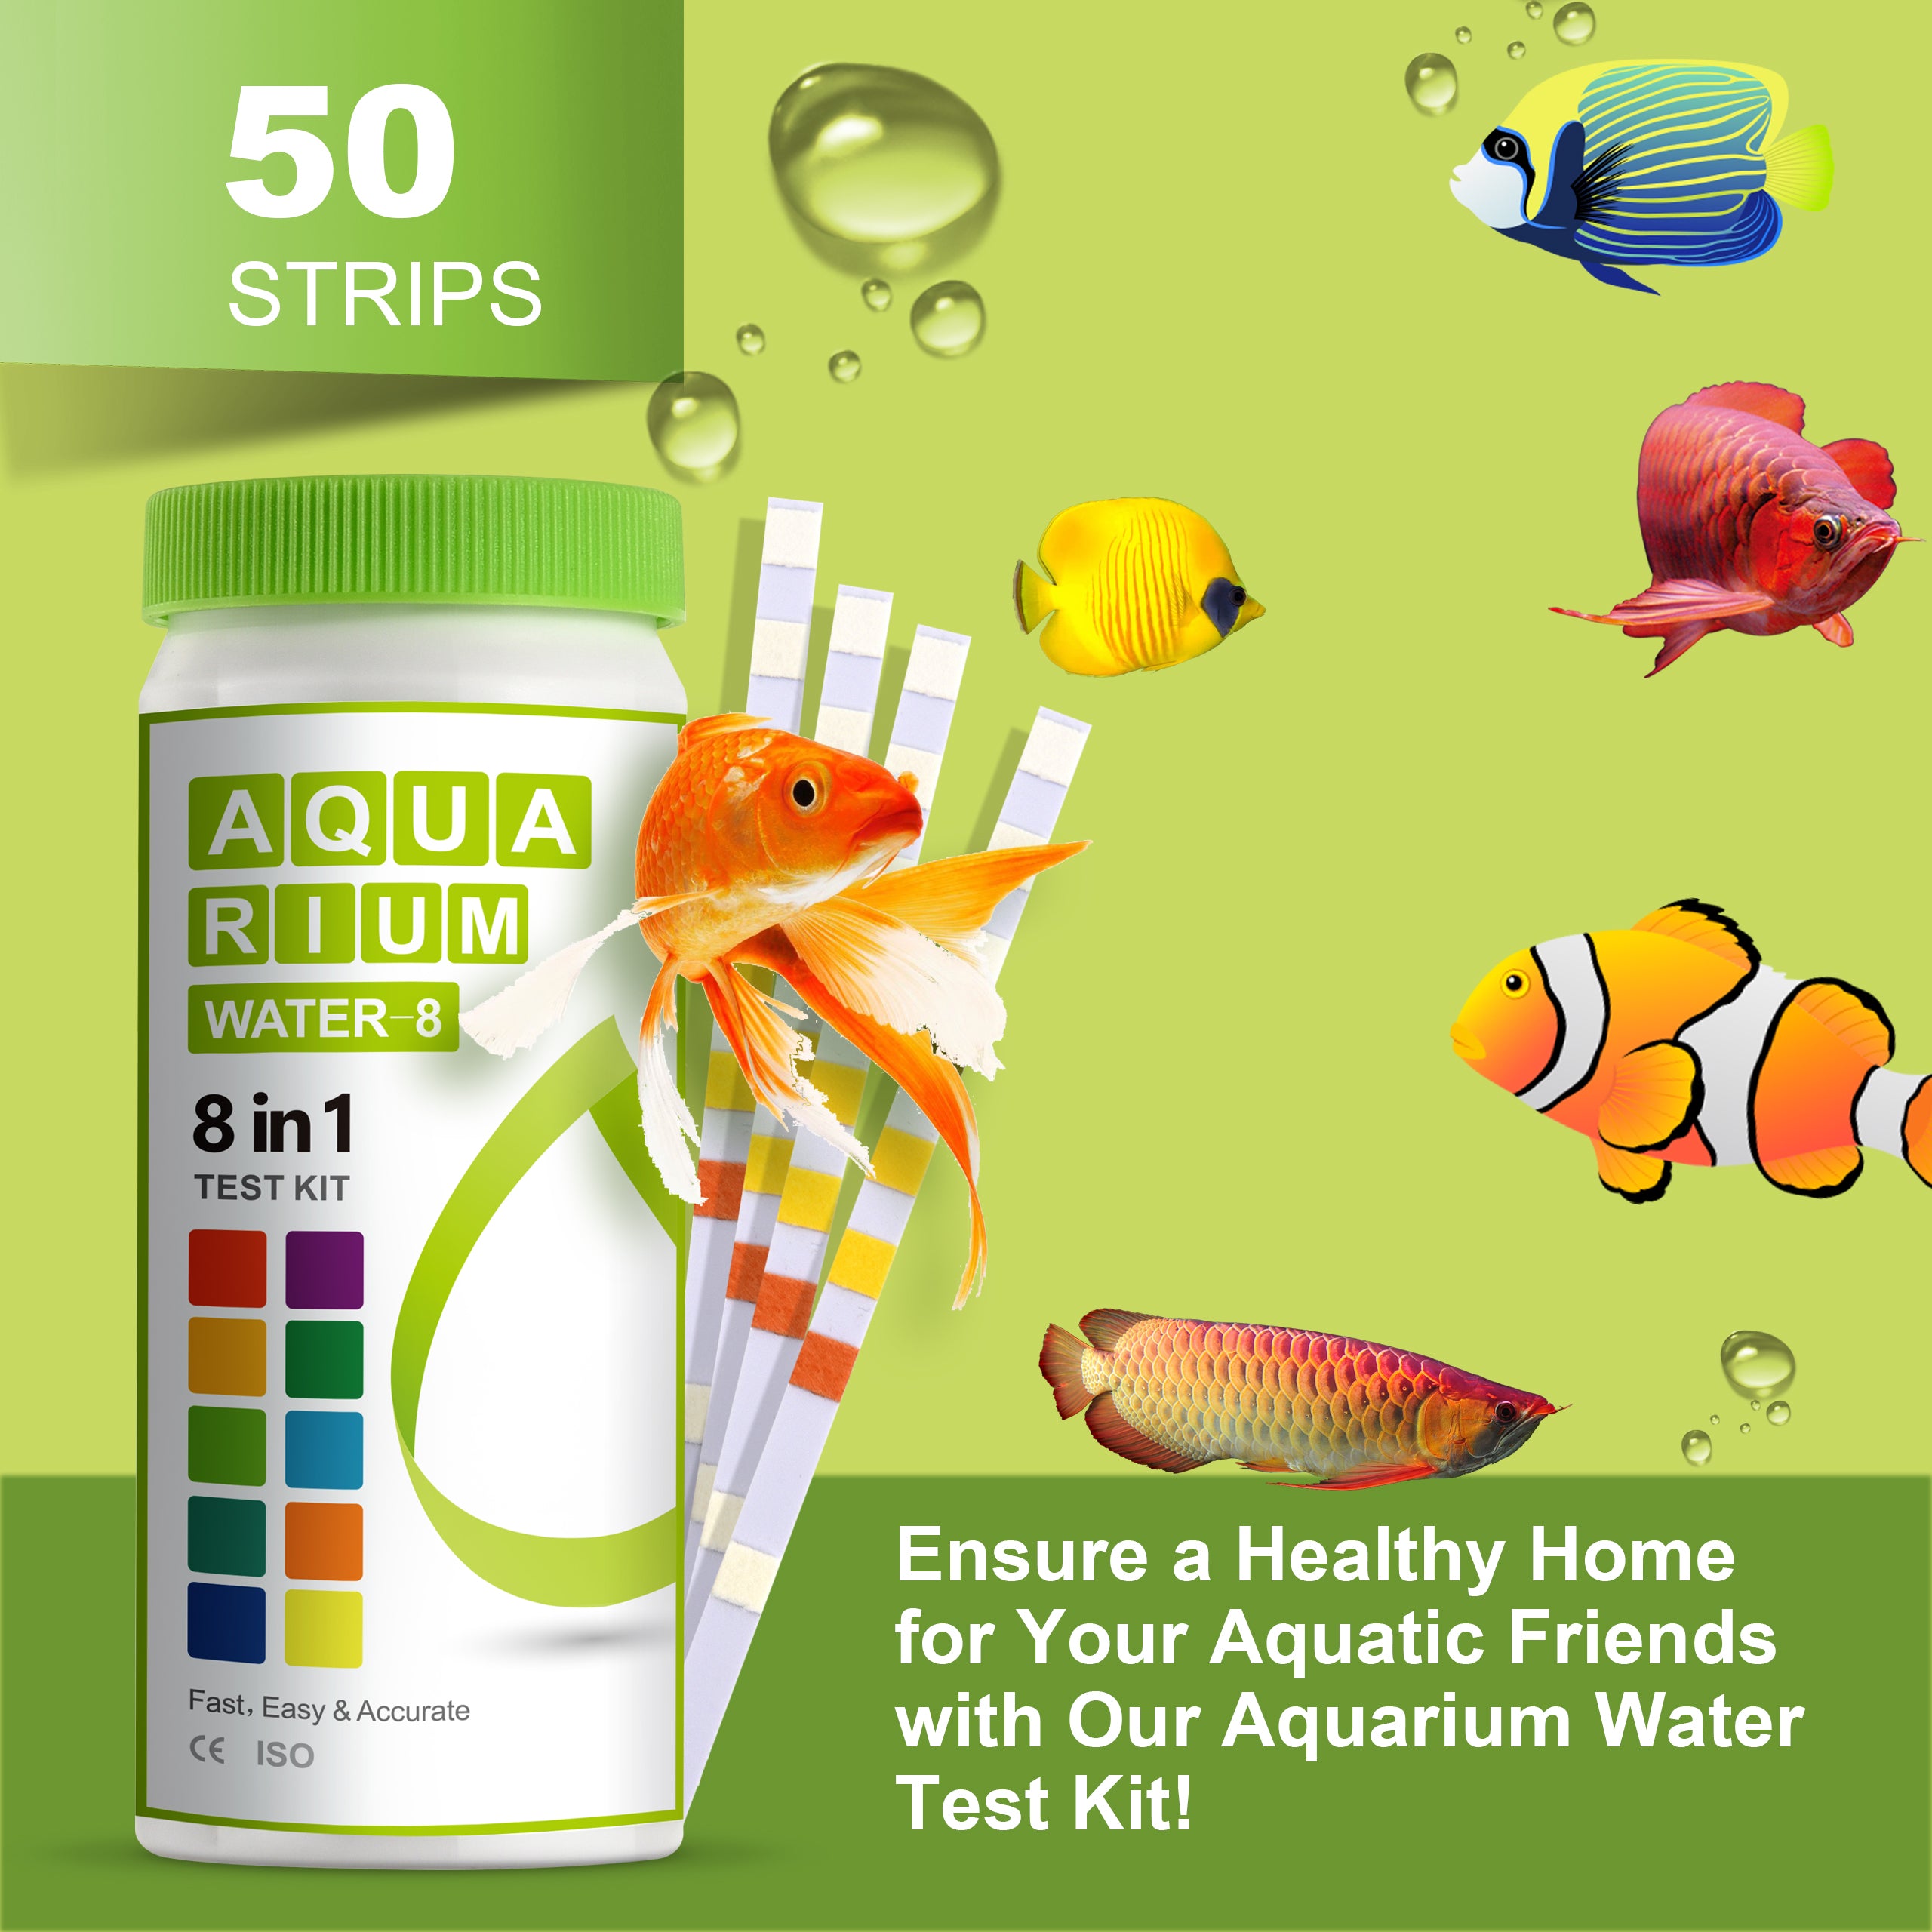 8-in-1 Aquarium Test Kit for Fish Tanks - Quick & Accurate Water Testing Strips for Aquariums & Ponds. Tests pH, Ammonia, Alkalinity, Hardness, Chlorine, etc. (K02-500)